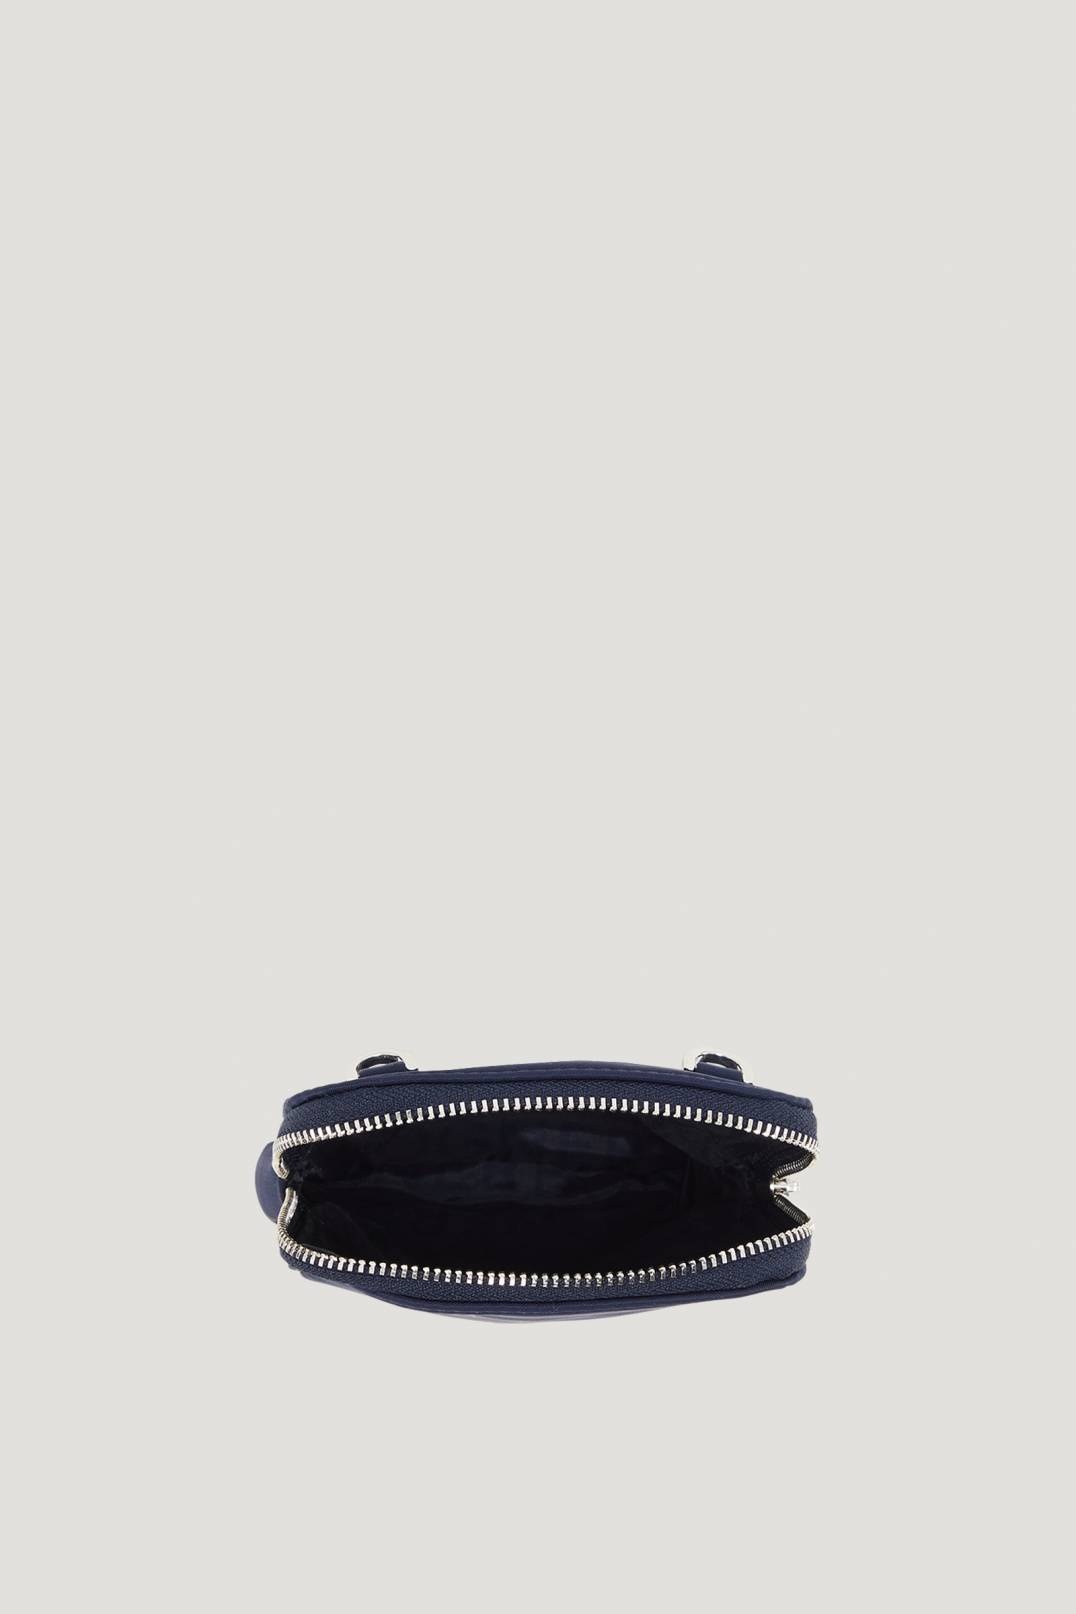 VERBIER PLAY JOHANNA SMARTPHONE POUCH IN NAVY BLUE - 4